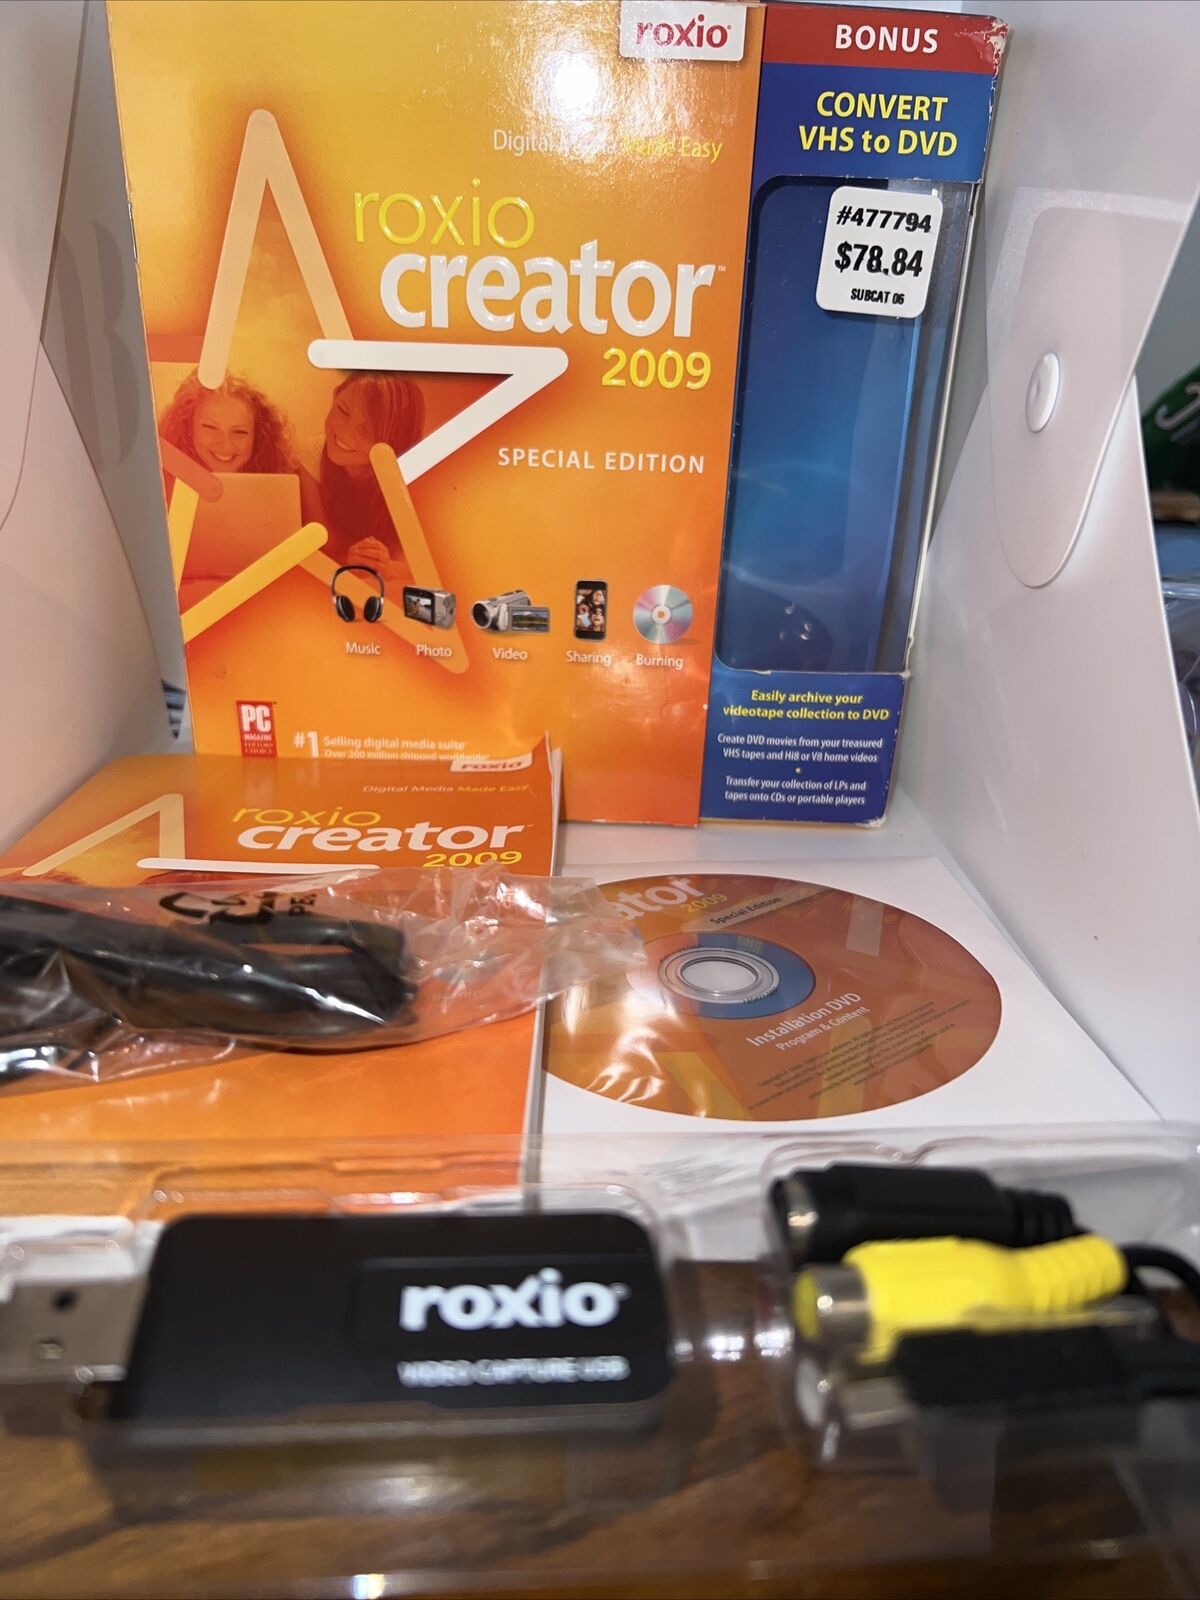 Roxio Creator 2009 Special Edition w/ Convert VHS to DVD- NEW OPEN Complete